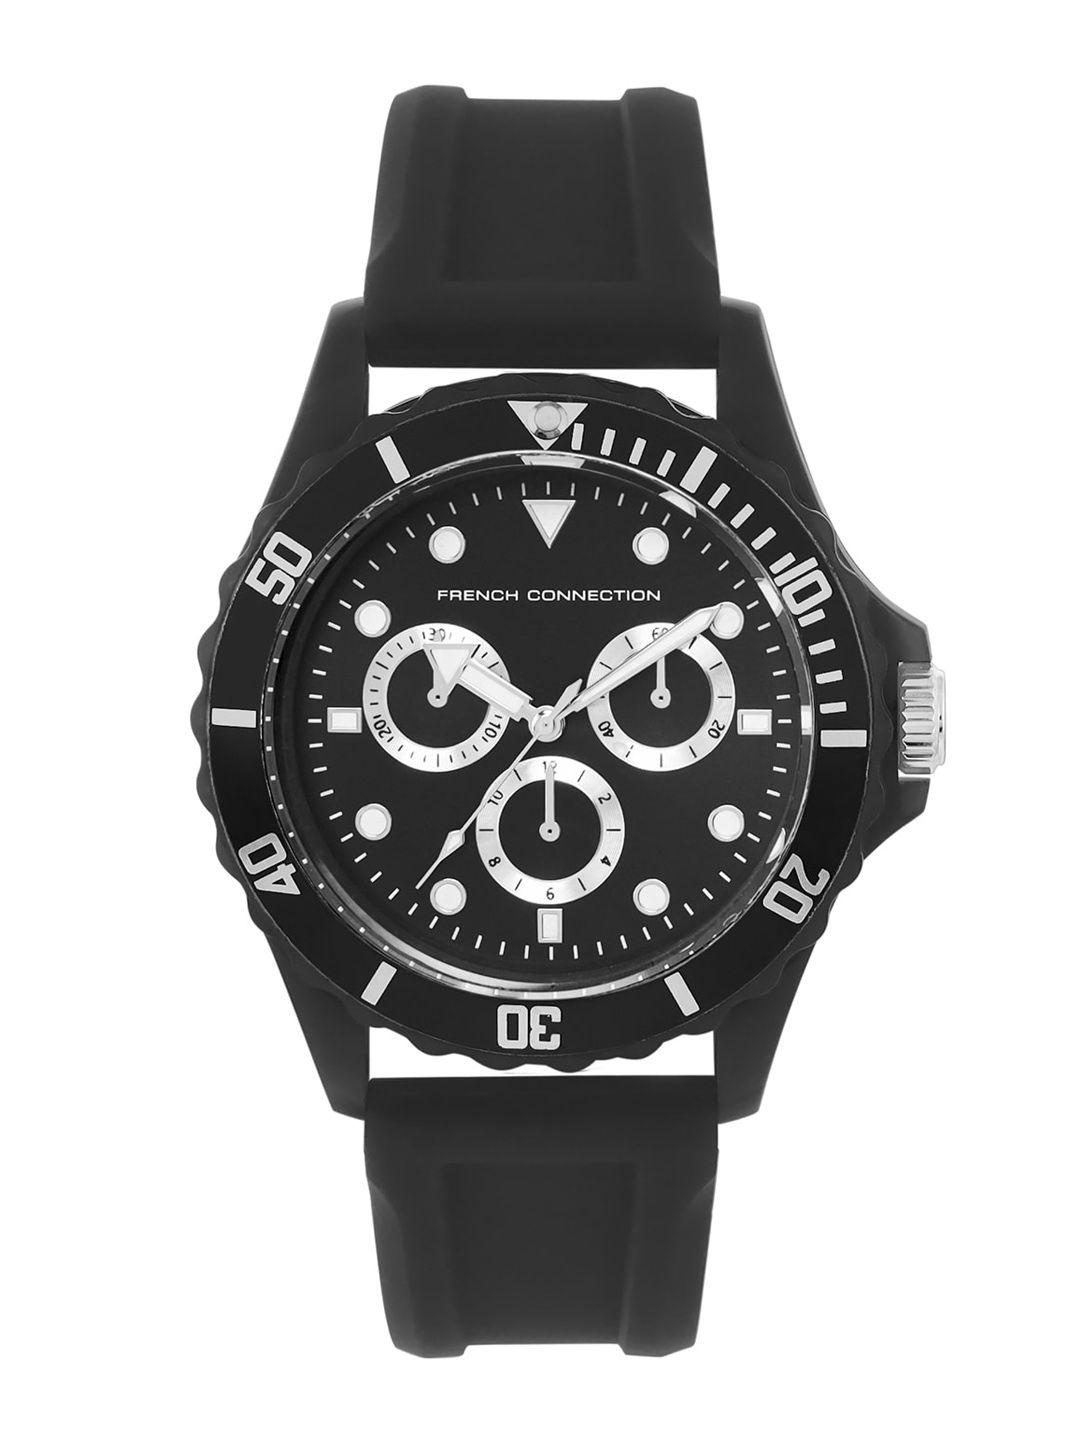 french-connection-men-black-dial-&-grey-wrap-around-straps-analogue-watch-fc177b